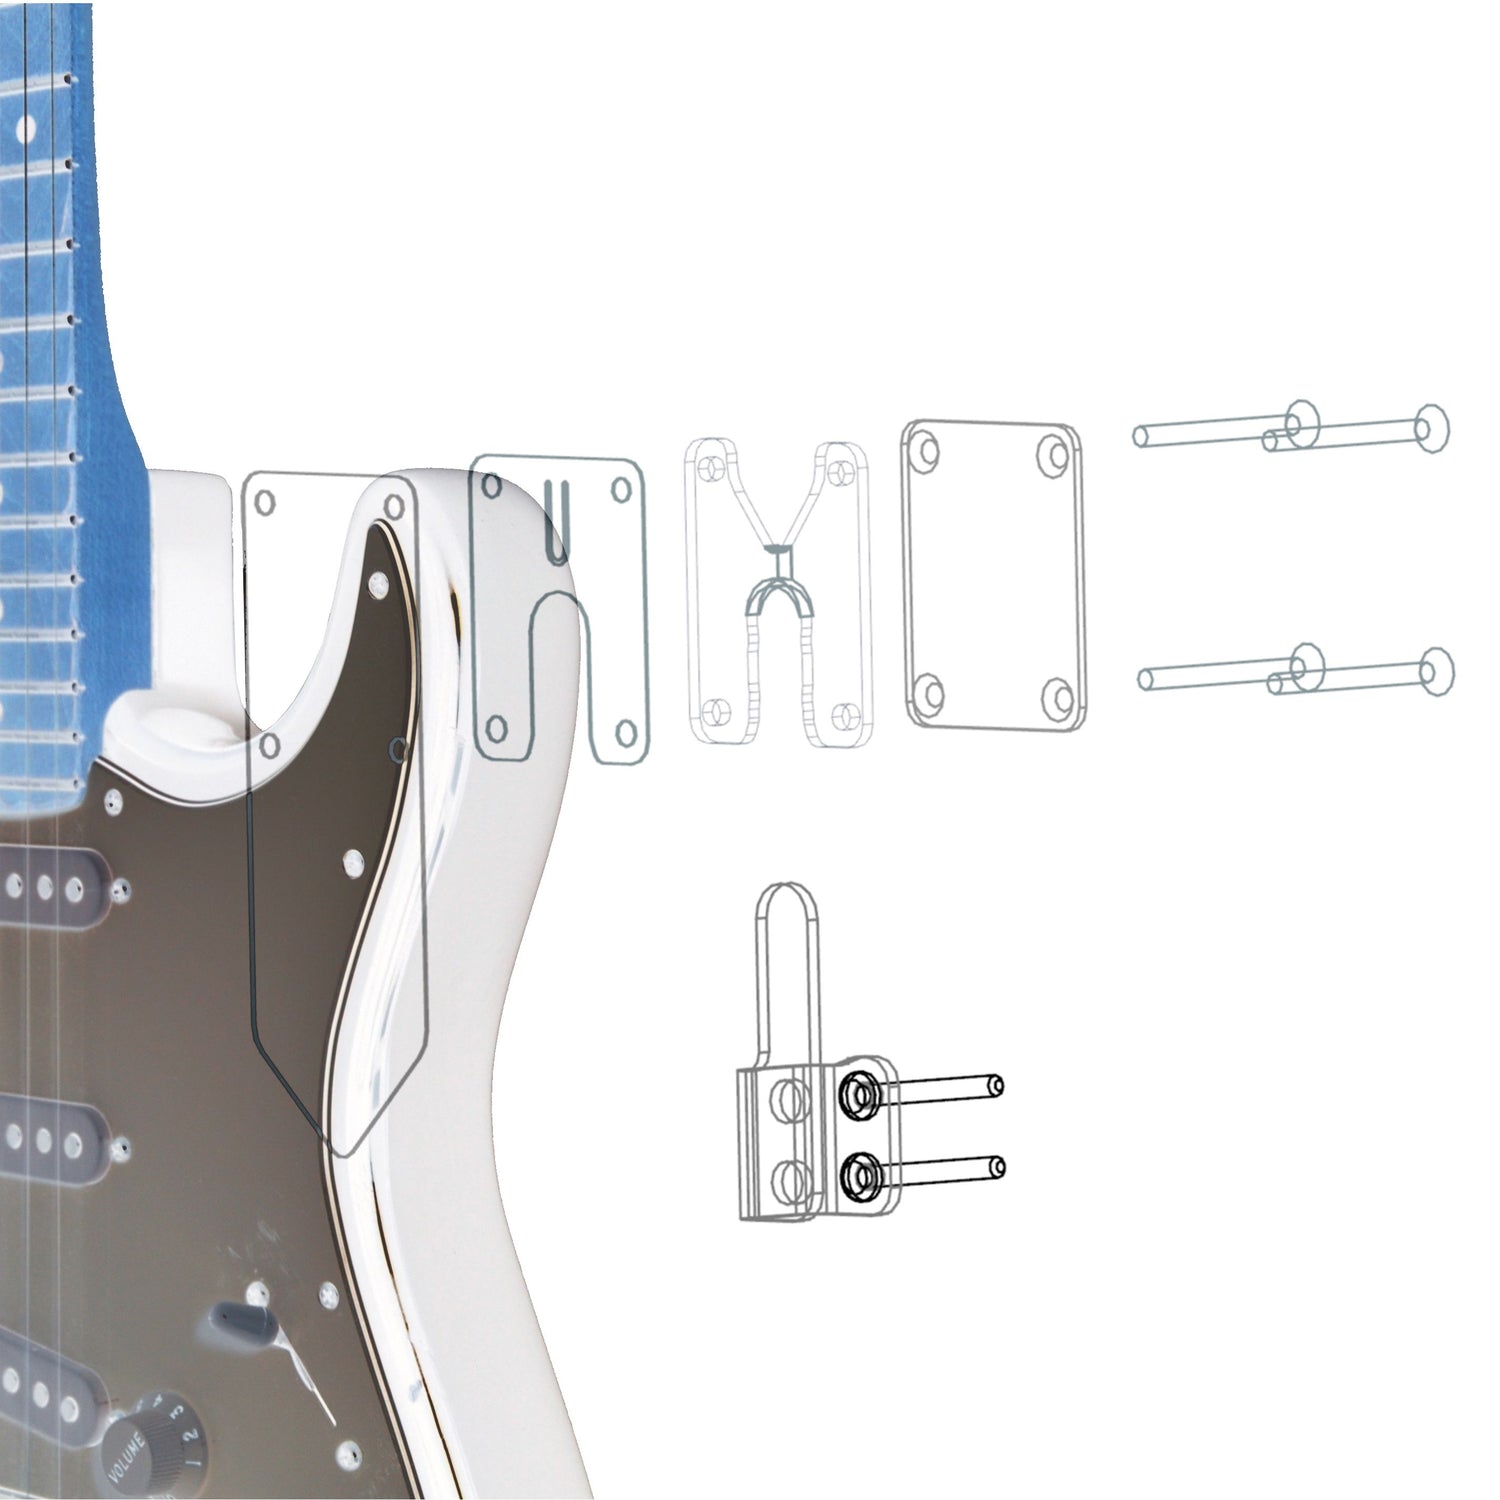 Stratocaster exploded view with Hoverguitar hanger